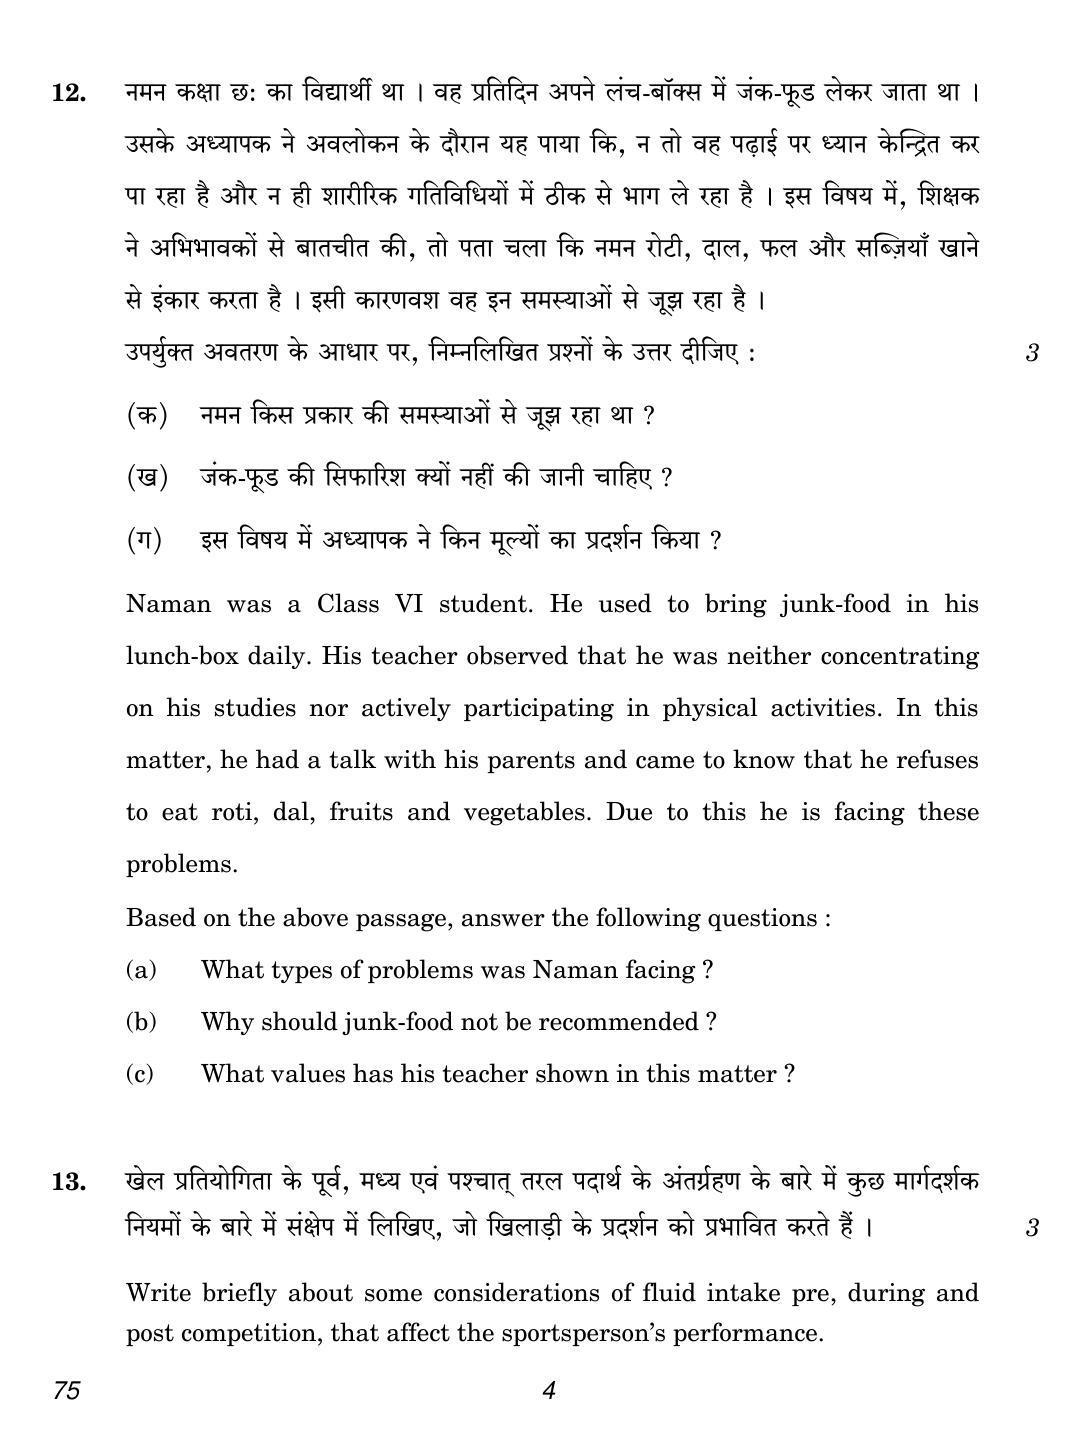 CBSE Class 12 75 Physical Education 2018 Question Paper - Page 4